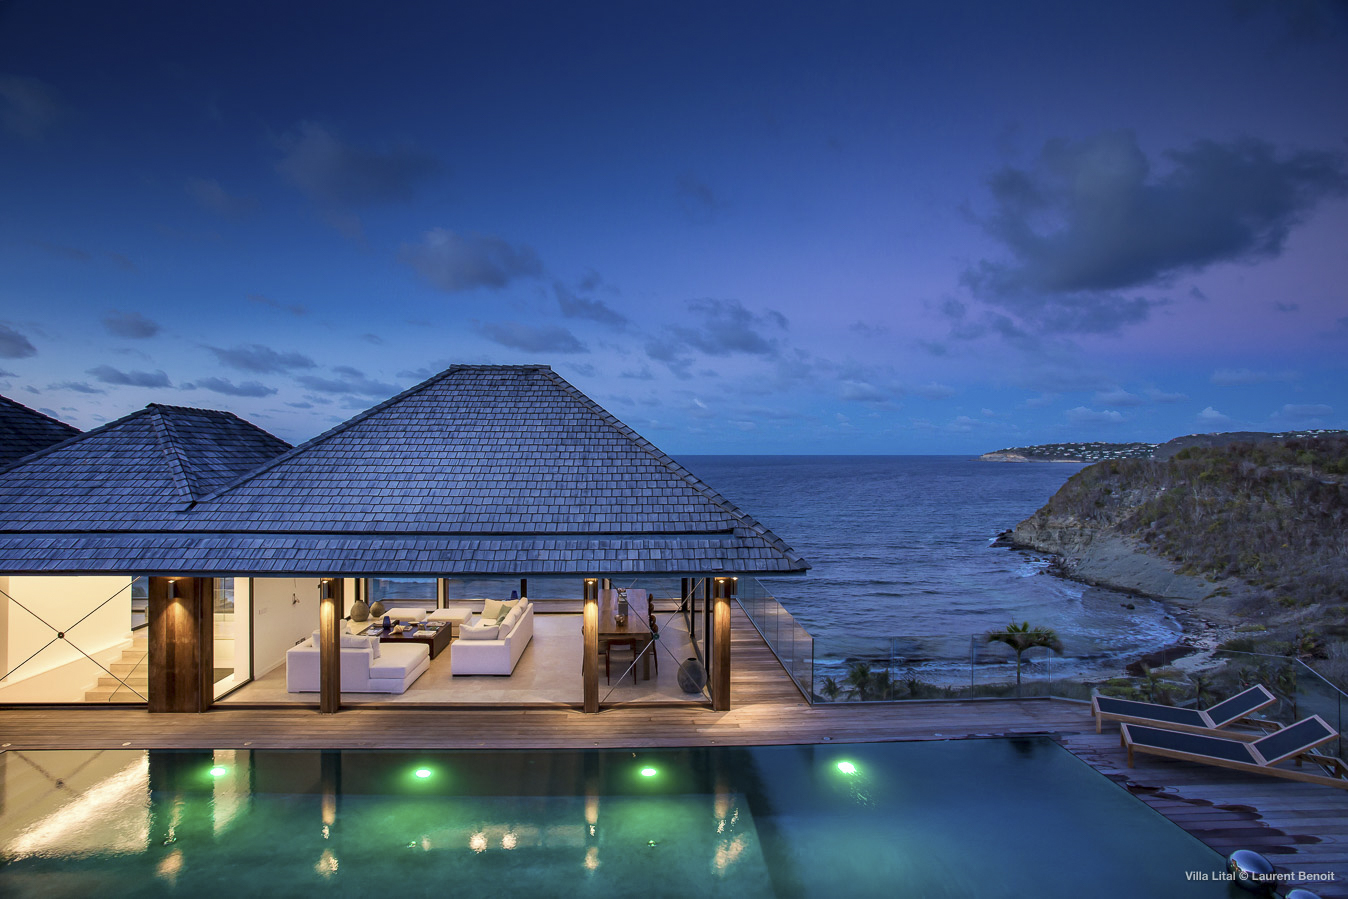 Win a Vacation in St. Barths with WIMCO Villas!